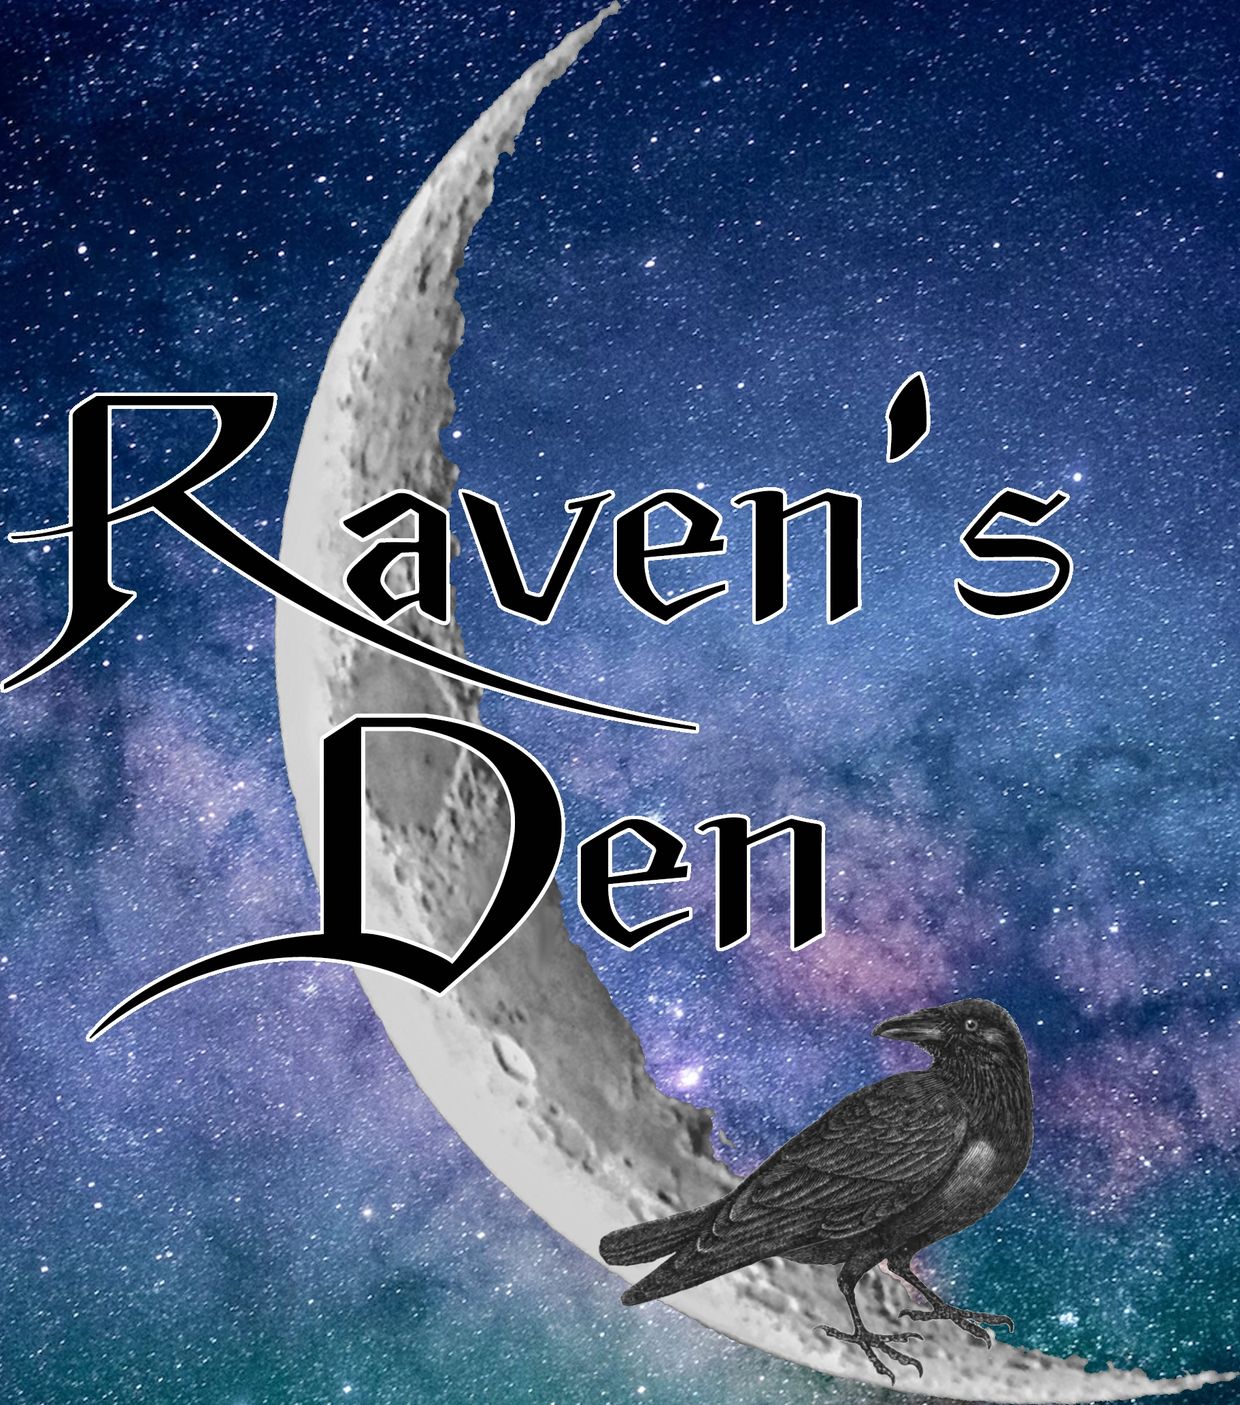 A painting of a raven perched on a crescent moon, with "Raven's Den" written in black text.